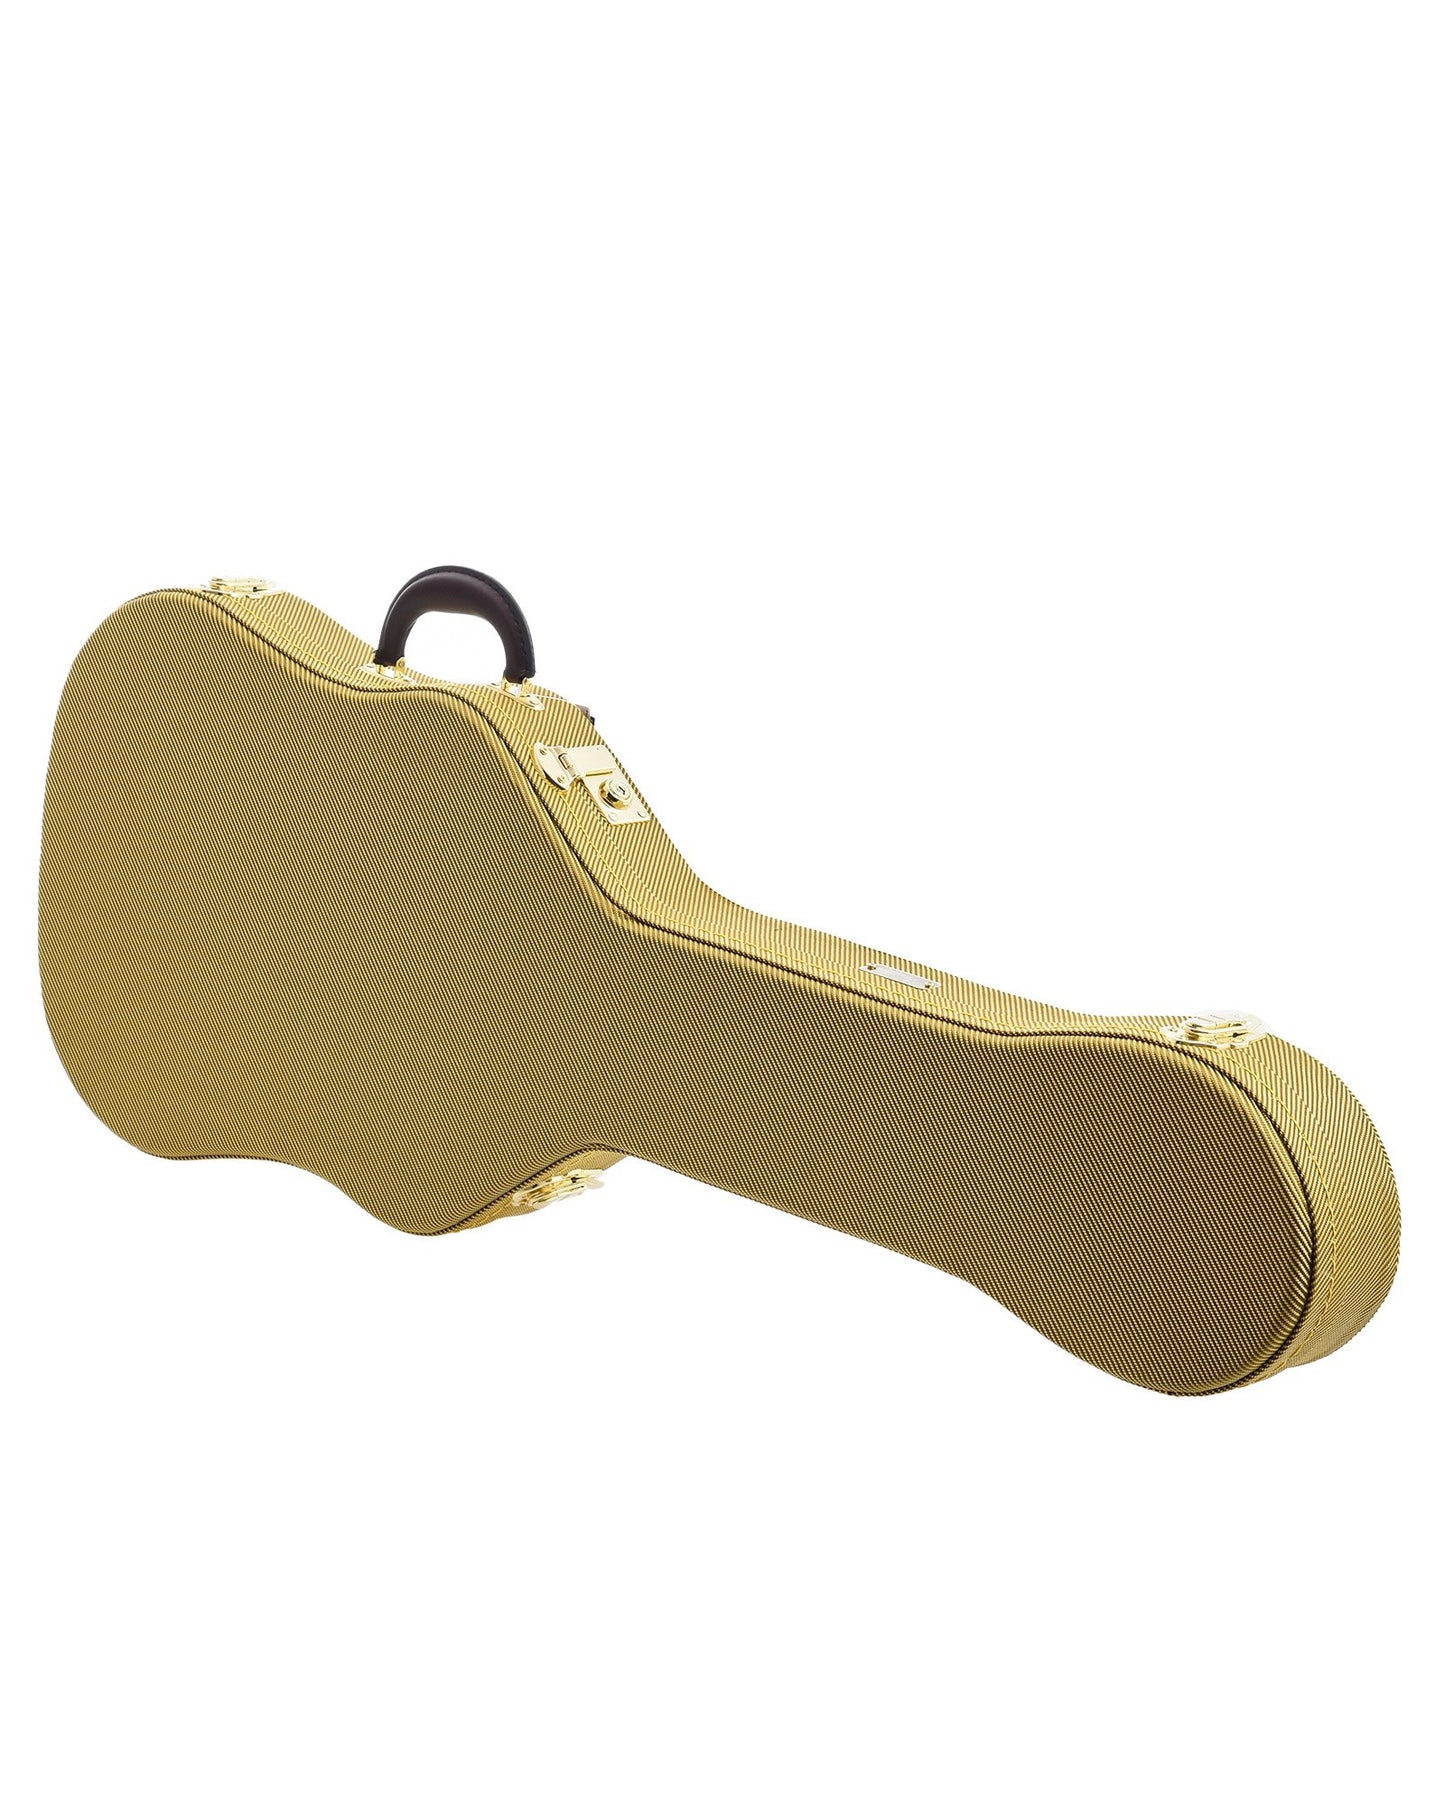 Image 1 of Fender Telecaster Tweed Thermometer Case - SKU# FTTTHERM : Product Type Accessories & Parts : Elderly Instruments